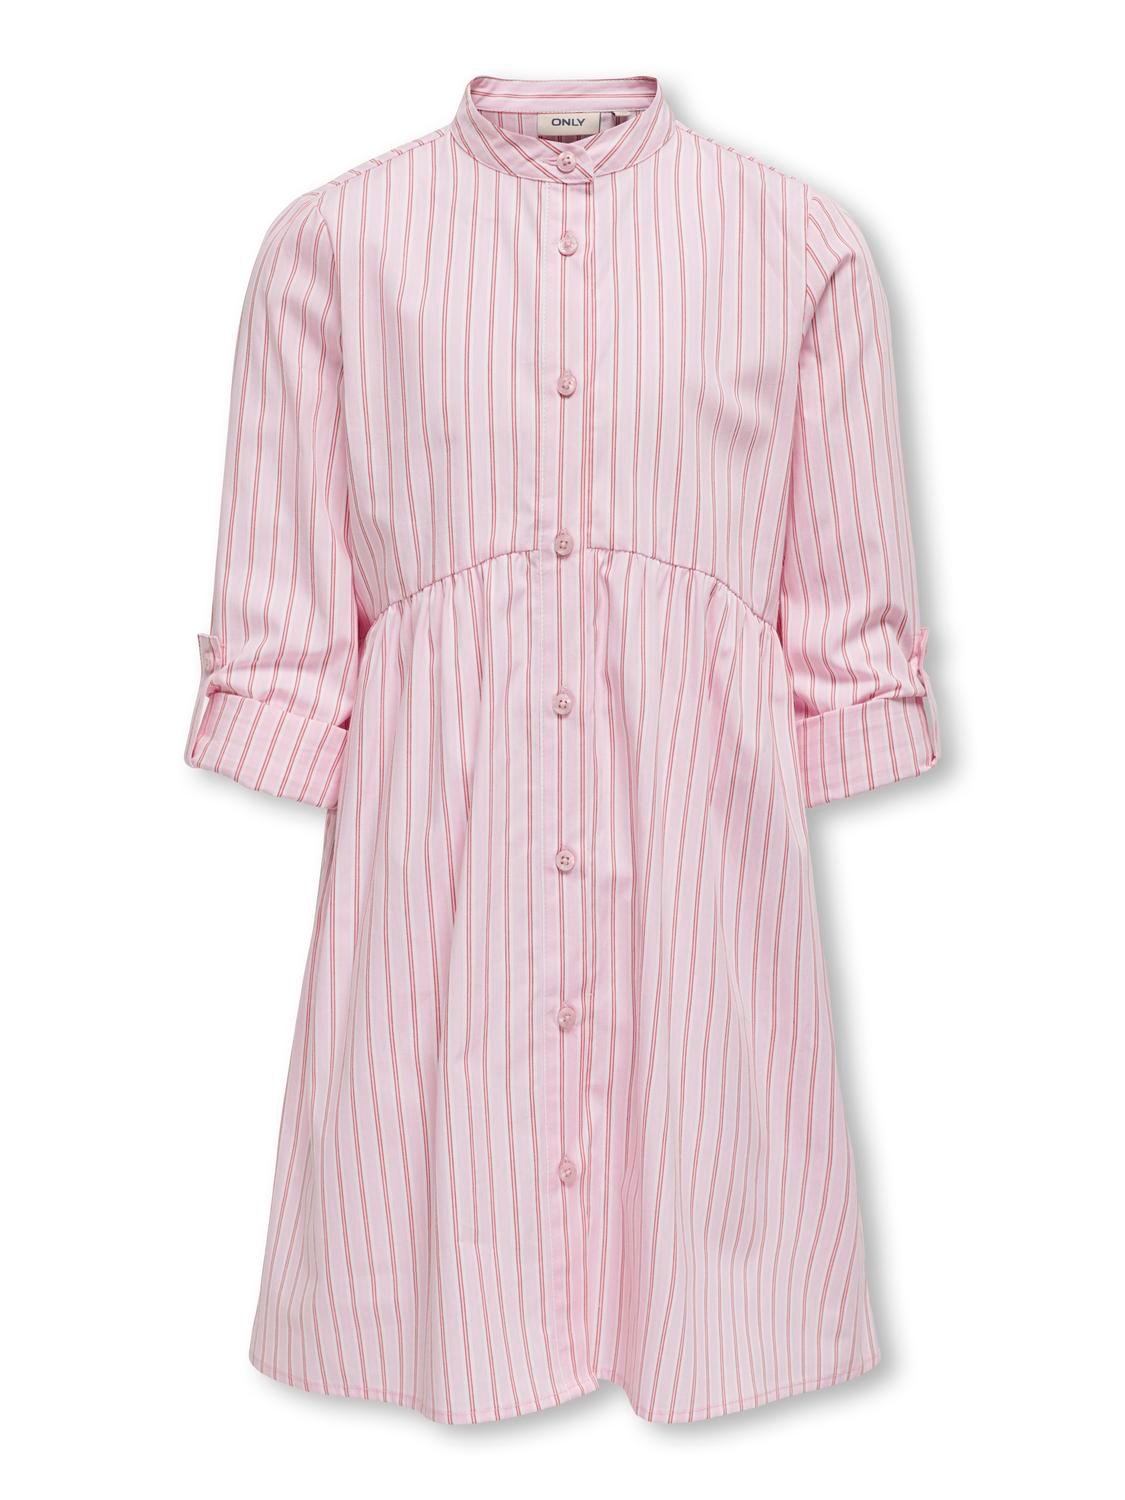 ONLY Striped dress -Begonia Pink - 15317152